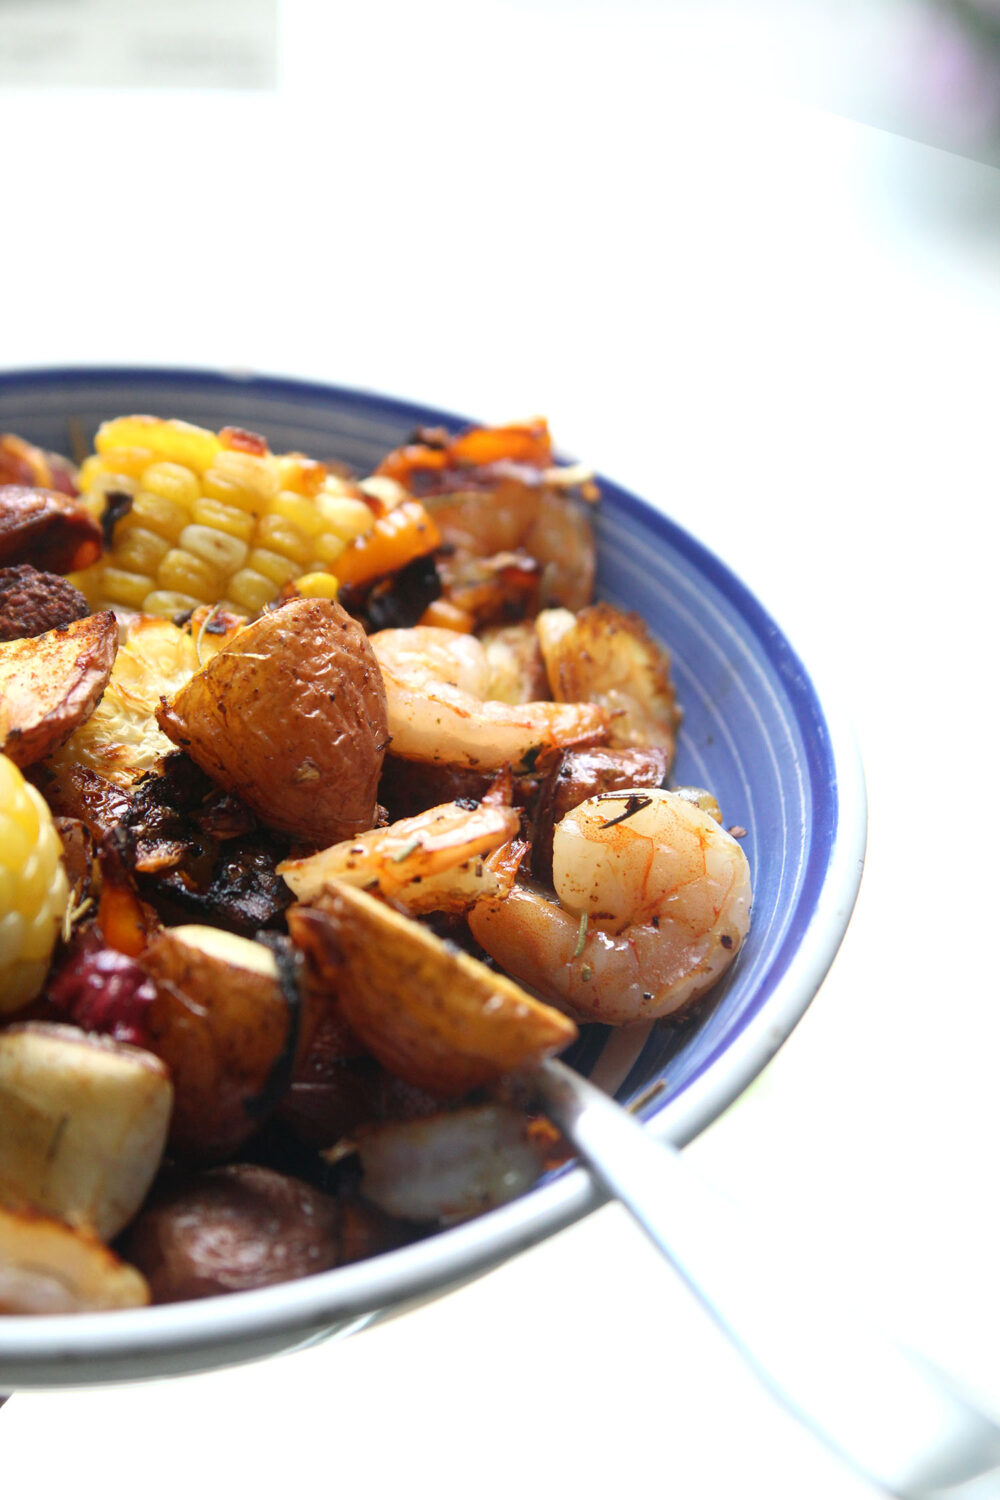 A blue and white plate holds a pile of potatoes, corn, shrimp, roasted onions and peppers. You can see green strips of rosemary on the dish as well.